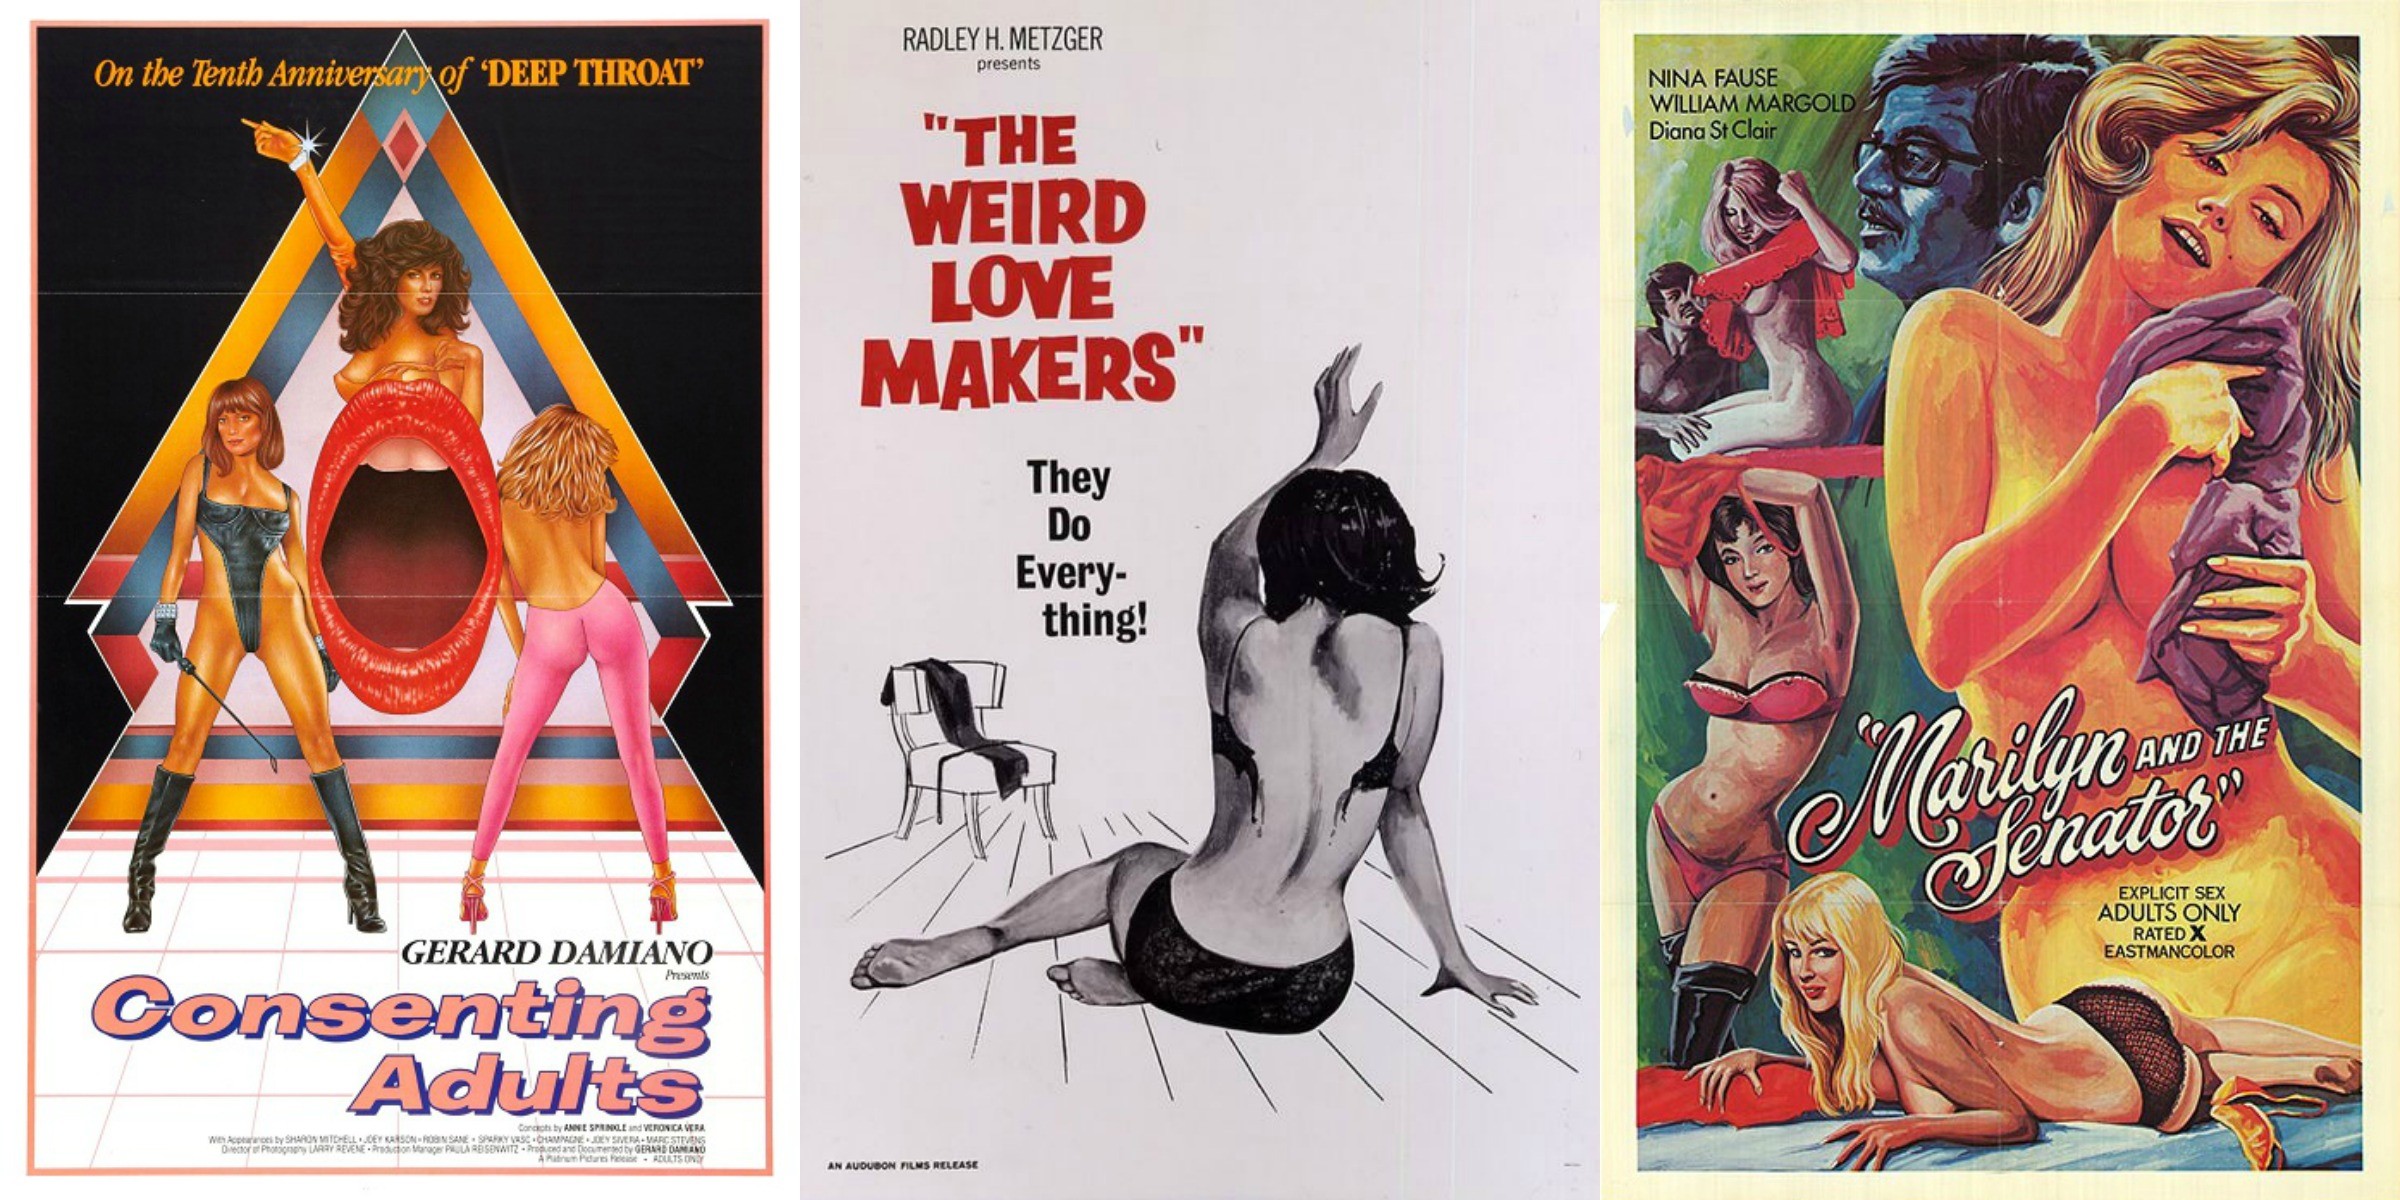 70s Polish Porn Videos - Erotic adult movie posters from the 60s and 70s | City Magazine